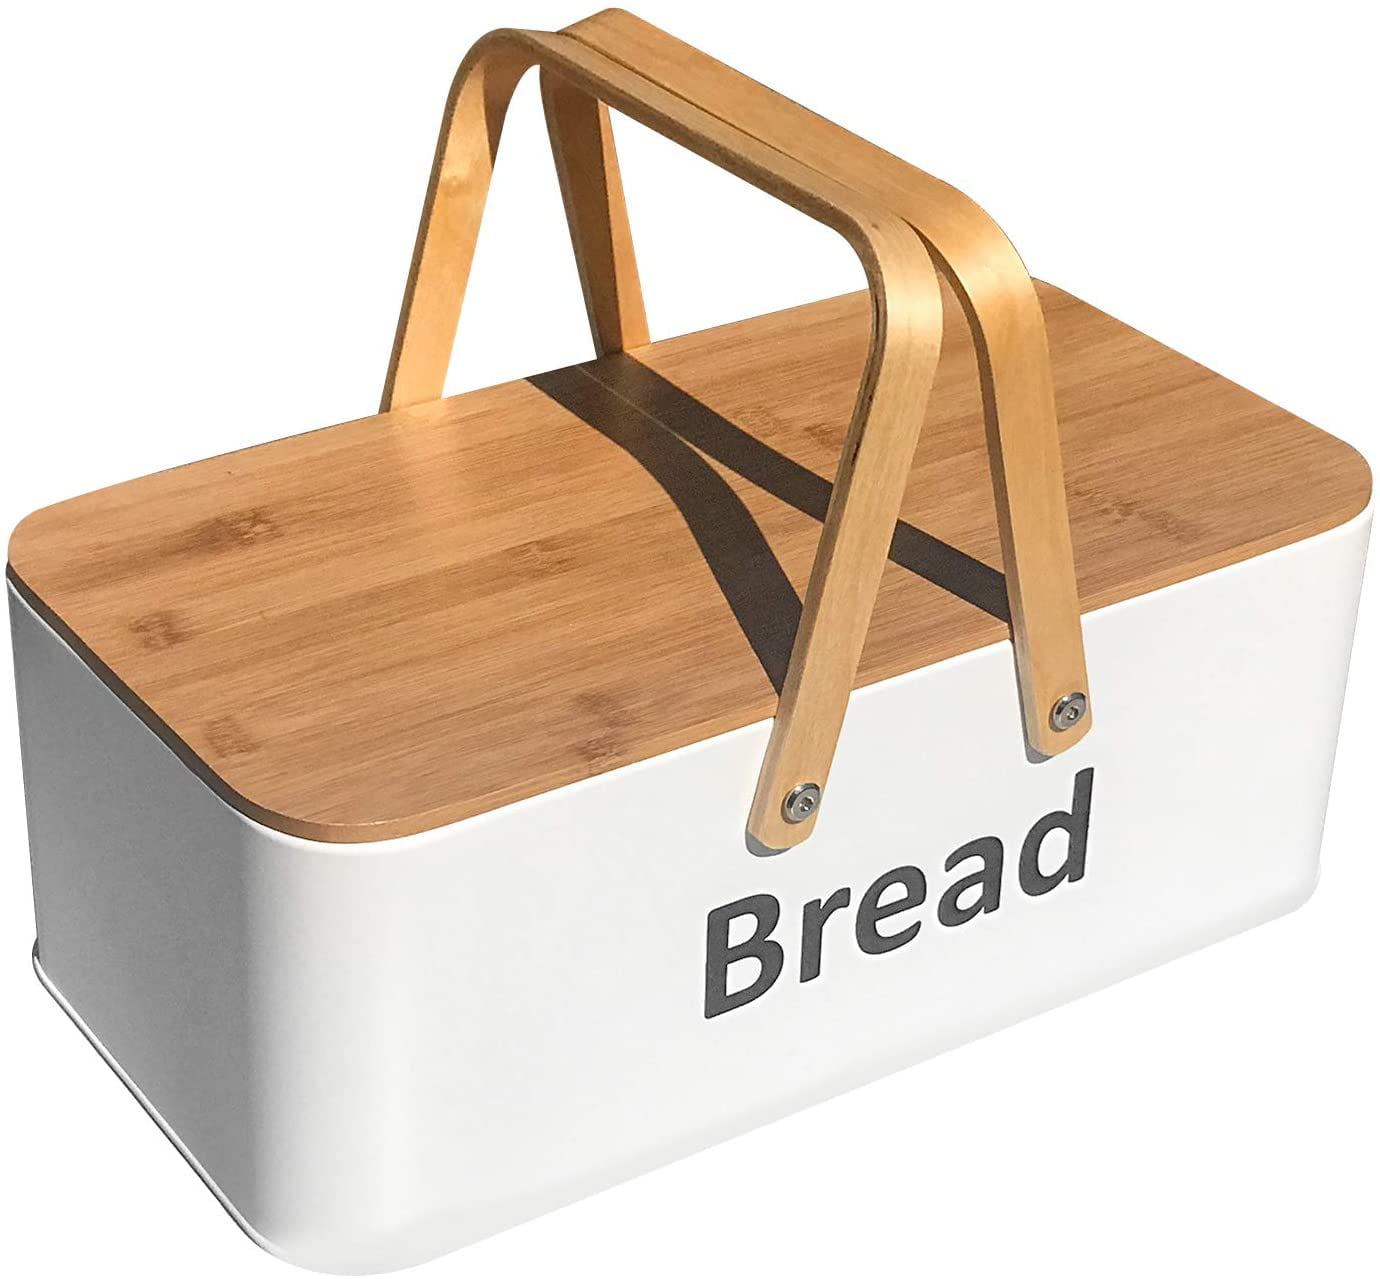 Bread Bin for Kitchen Counter for All Bread Storage Container Counter Organizer Farmhouse Kitchen with Bread Lettering White 12.6W x6.5D x9.06H HollyHOME Large Bread Box